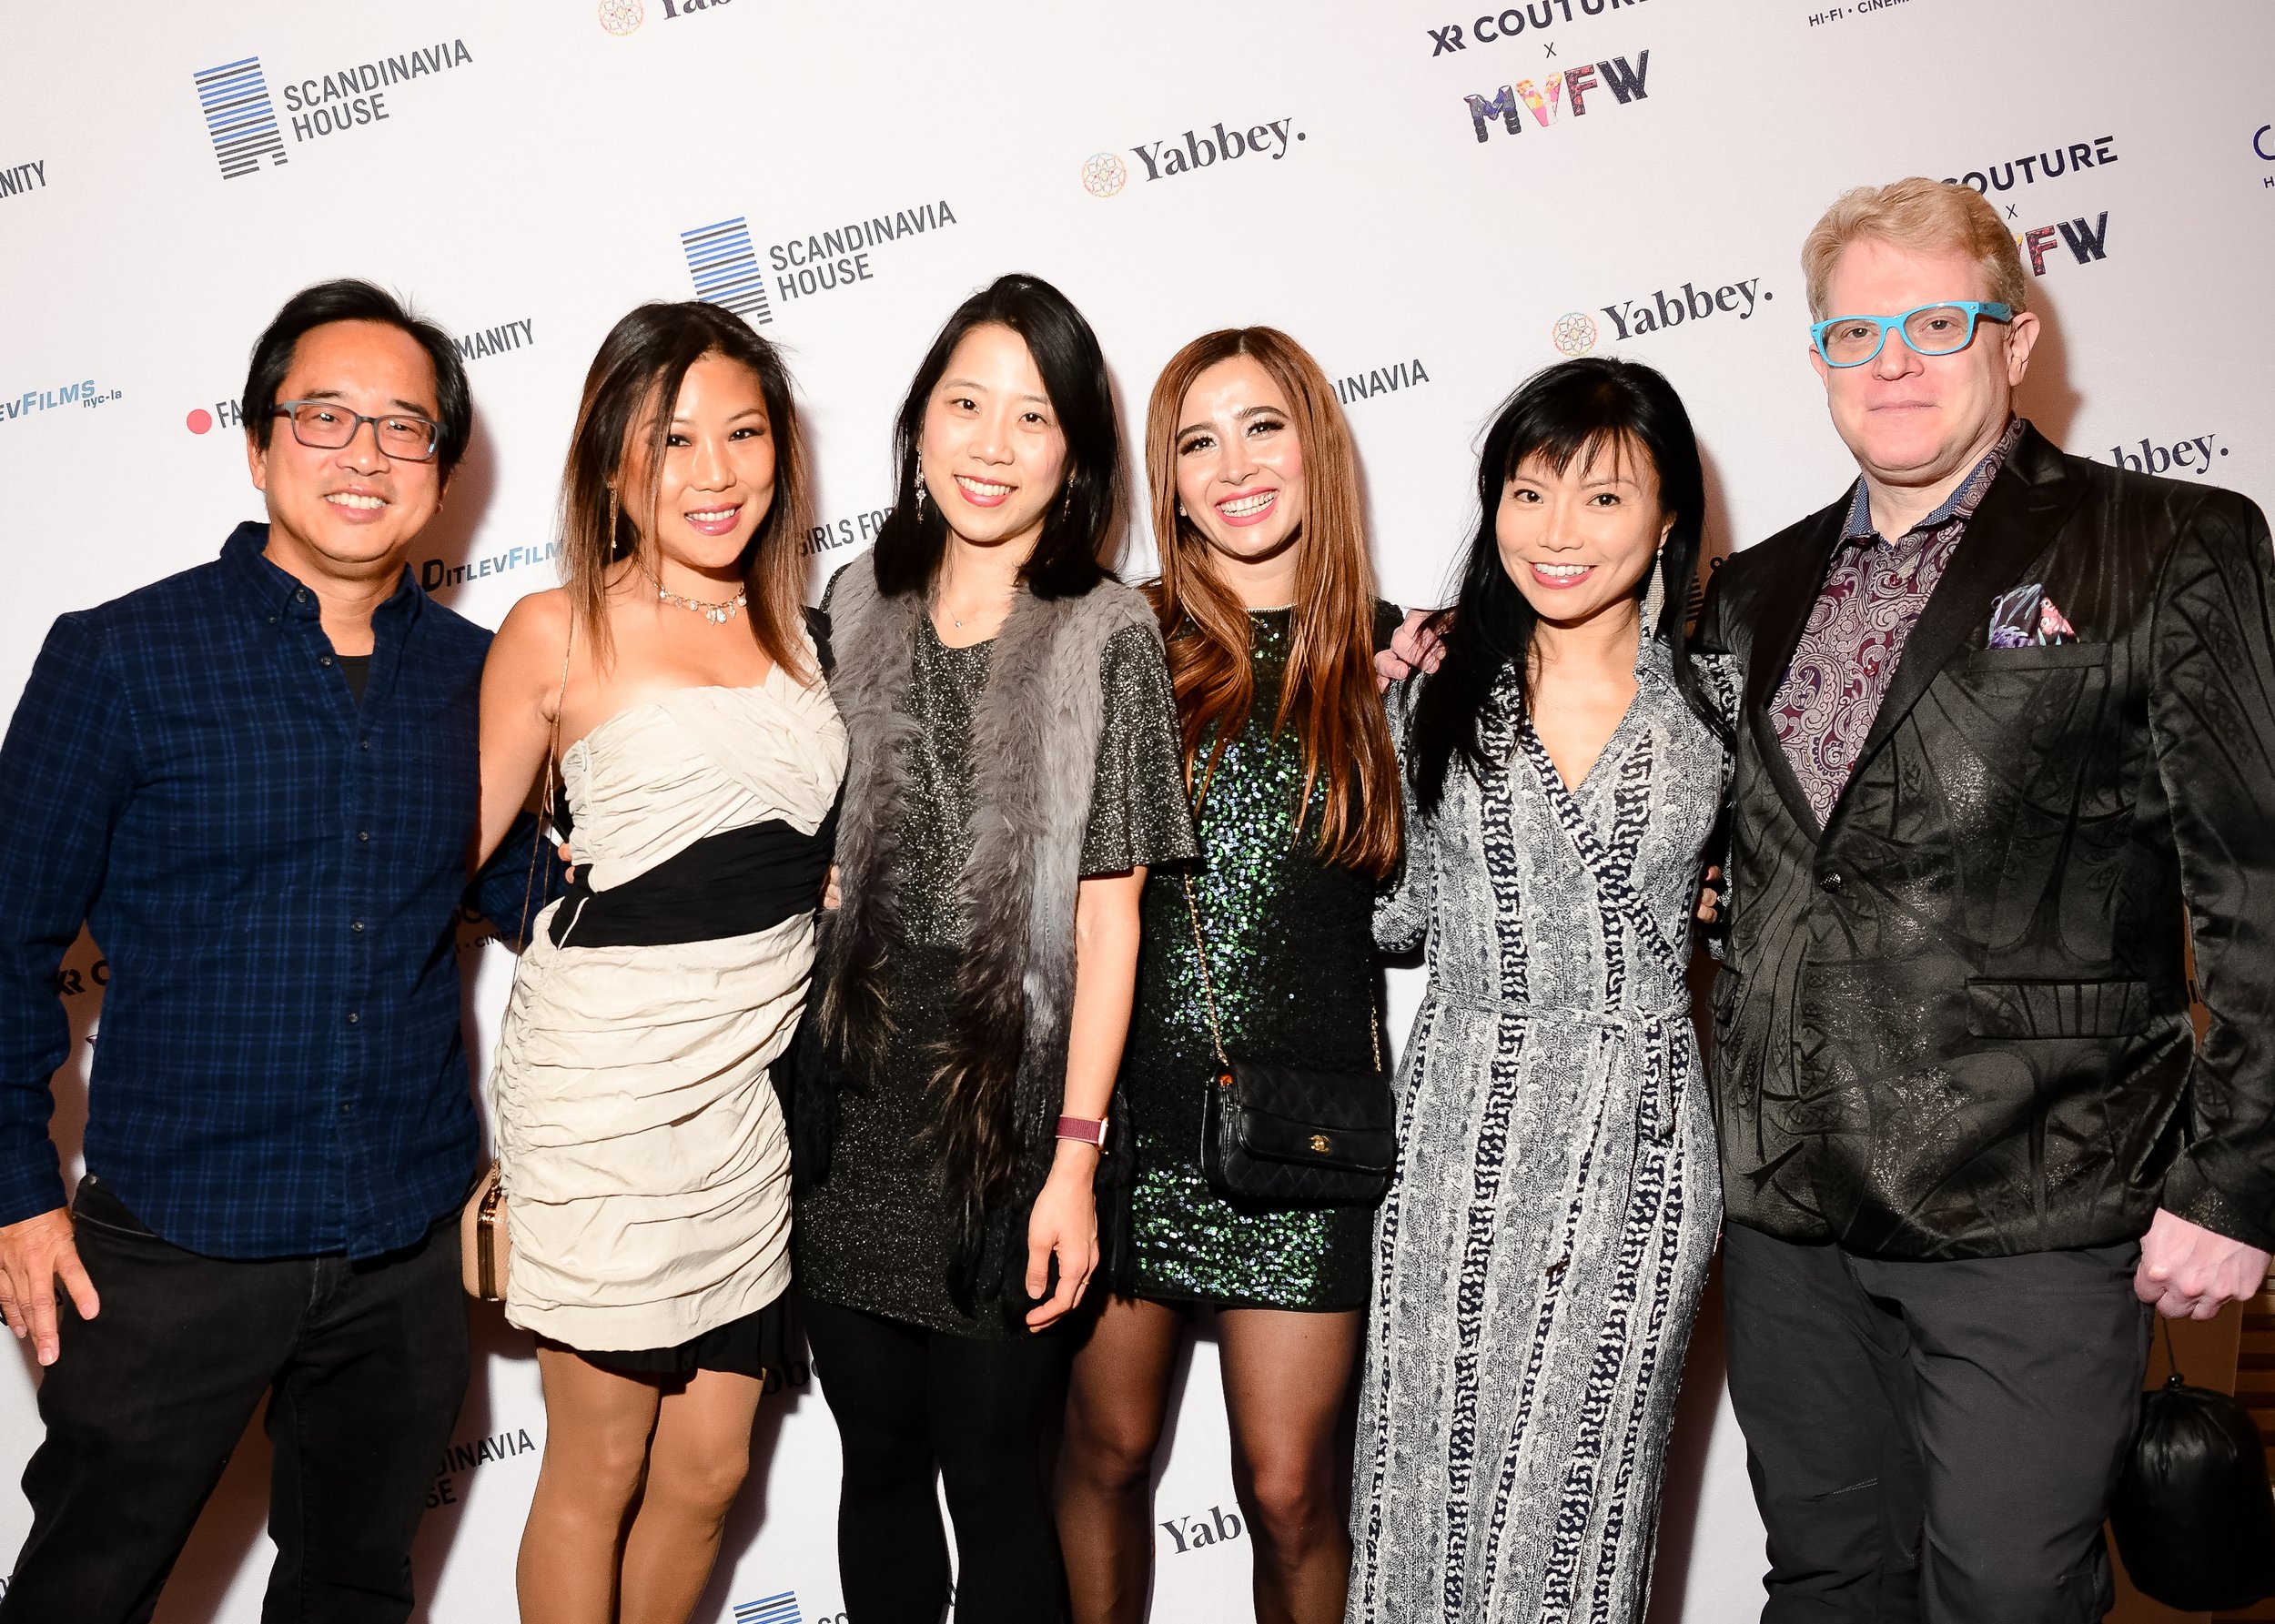 David Chan, Sylvia Lee, Add Jaein Set, Bouquet Occur, Mary Huang, Michael Gruenglas